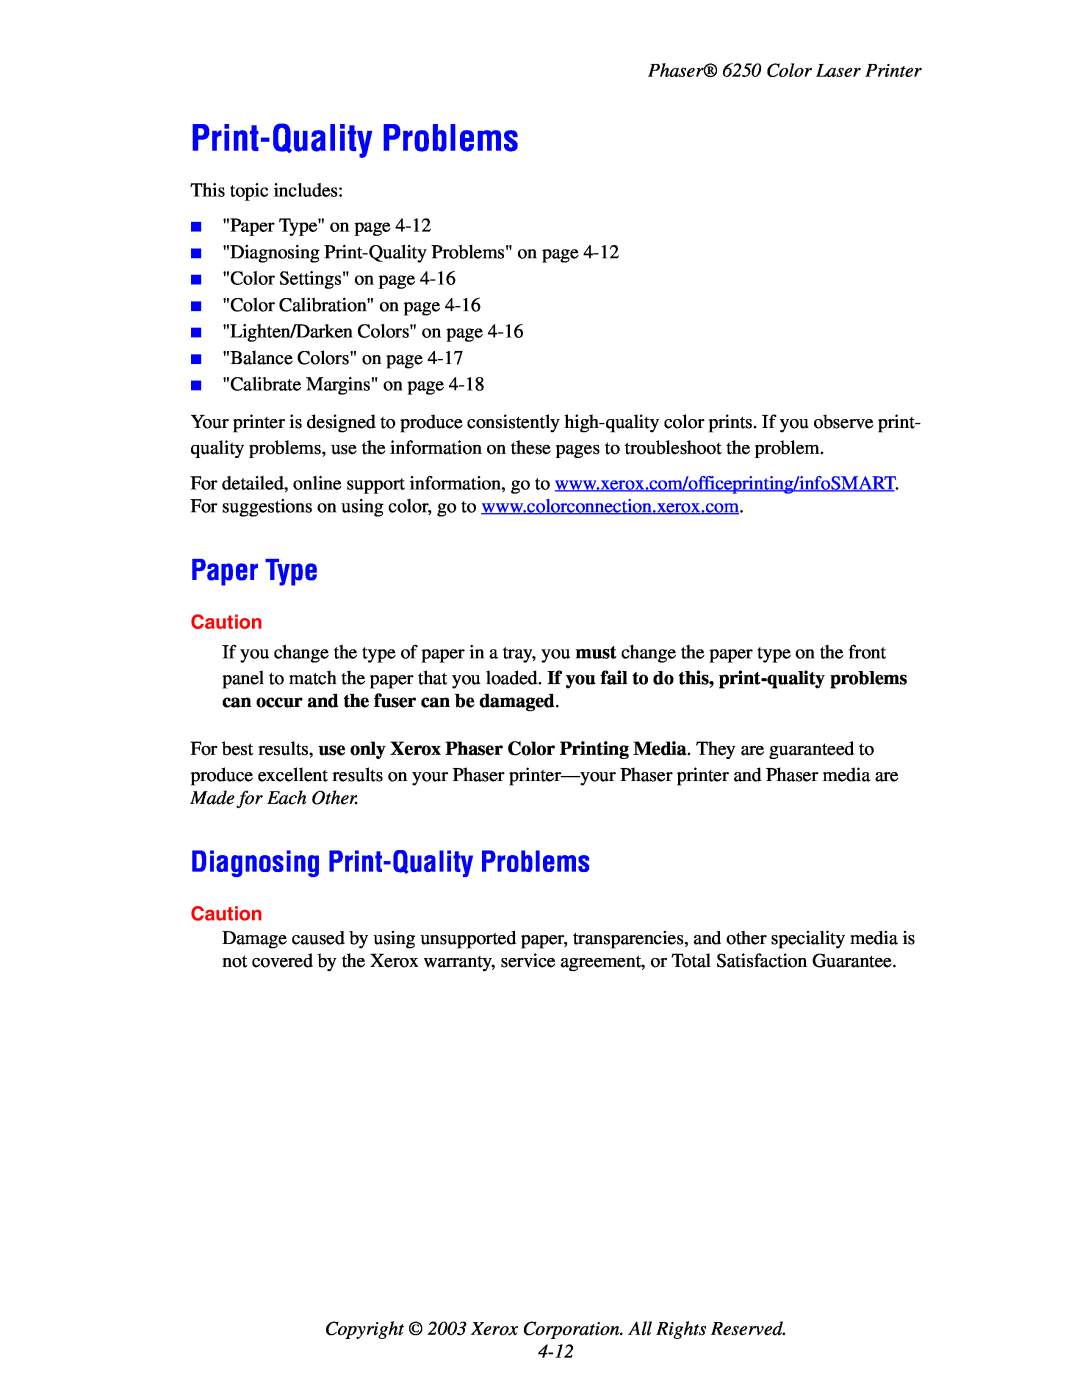 Xerox 6250 Paper Type, Diagnosing Print-Quality Problems, Copyright 2003 Xerox Corporation. All Rights Reserved 4-12 